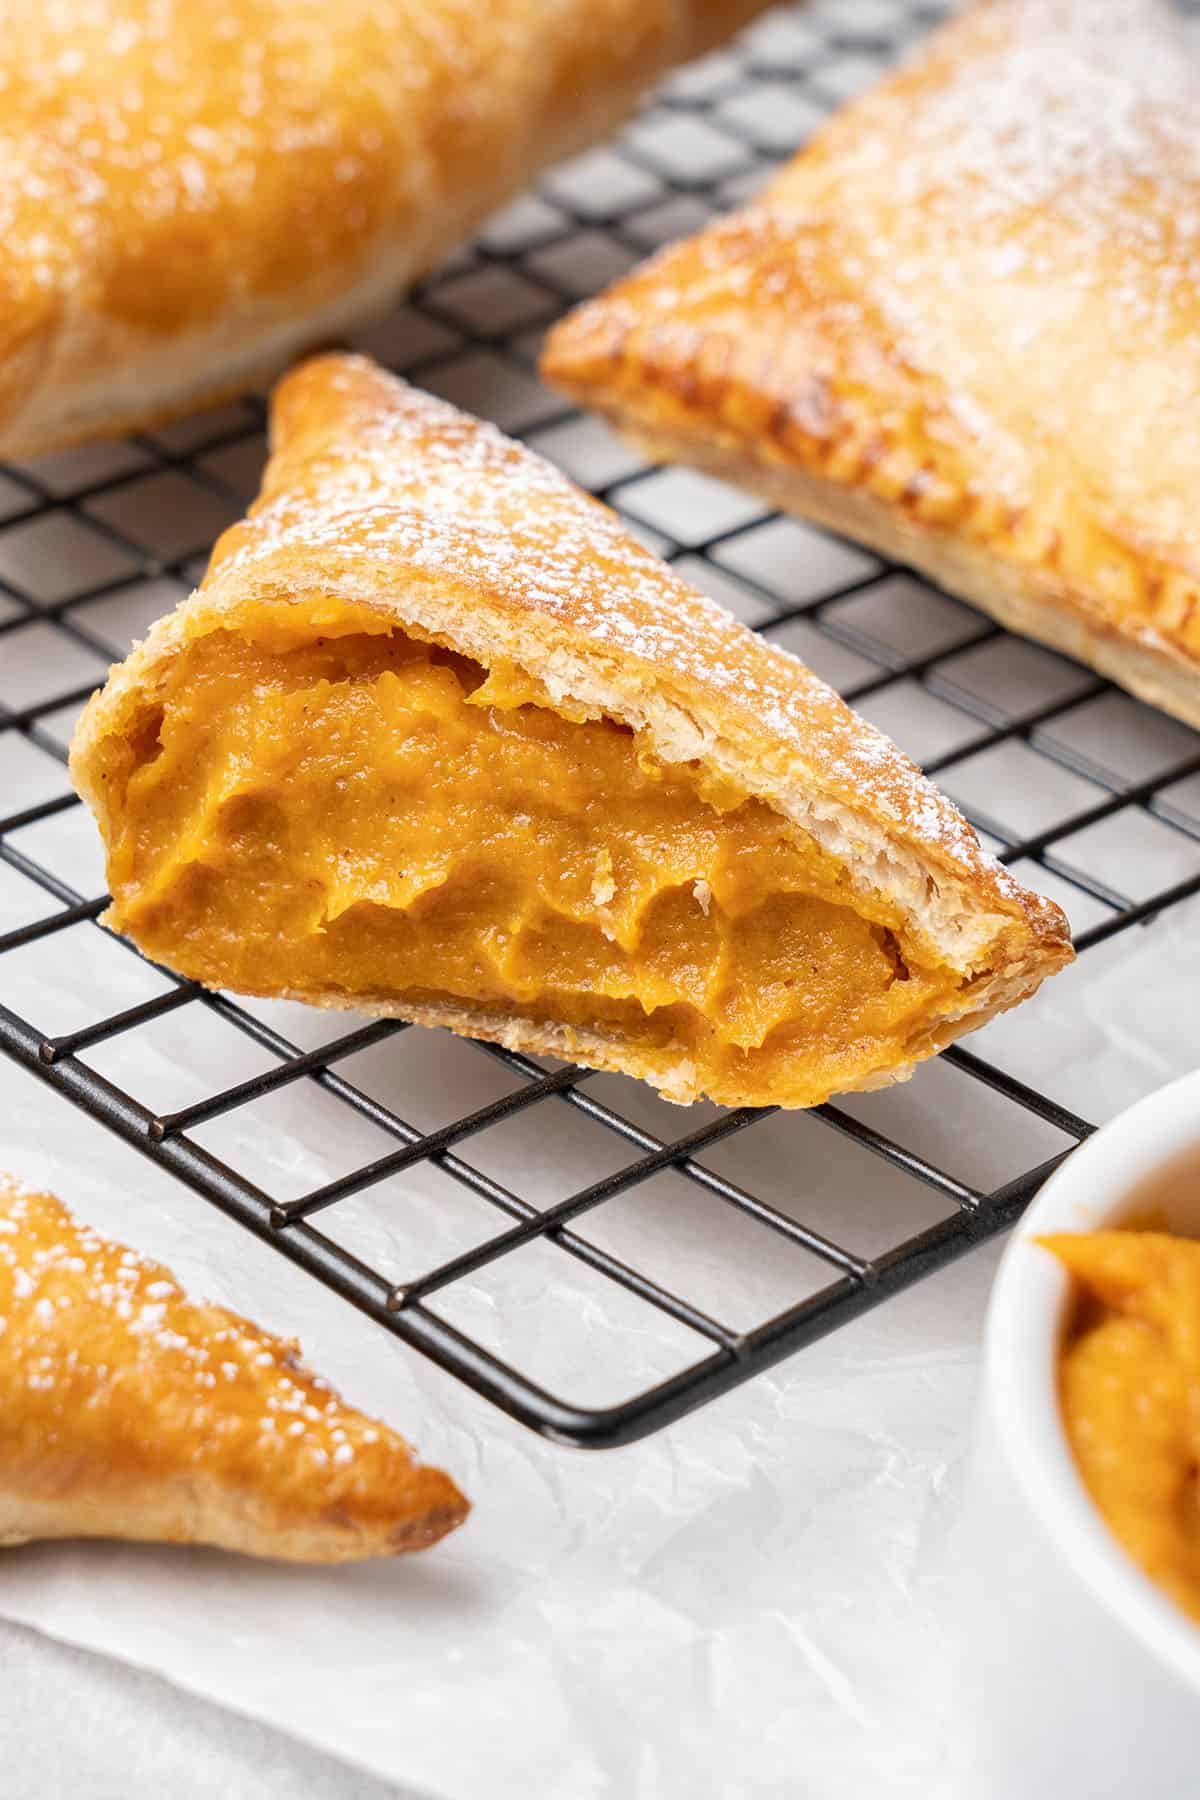 Pumpkin turnover on a cooling rack.